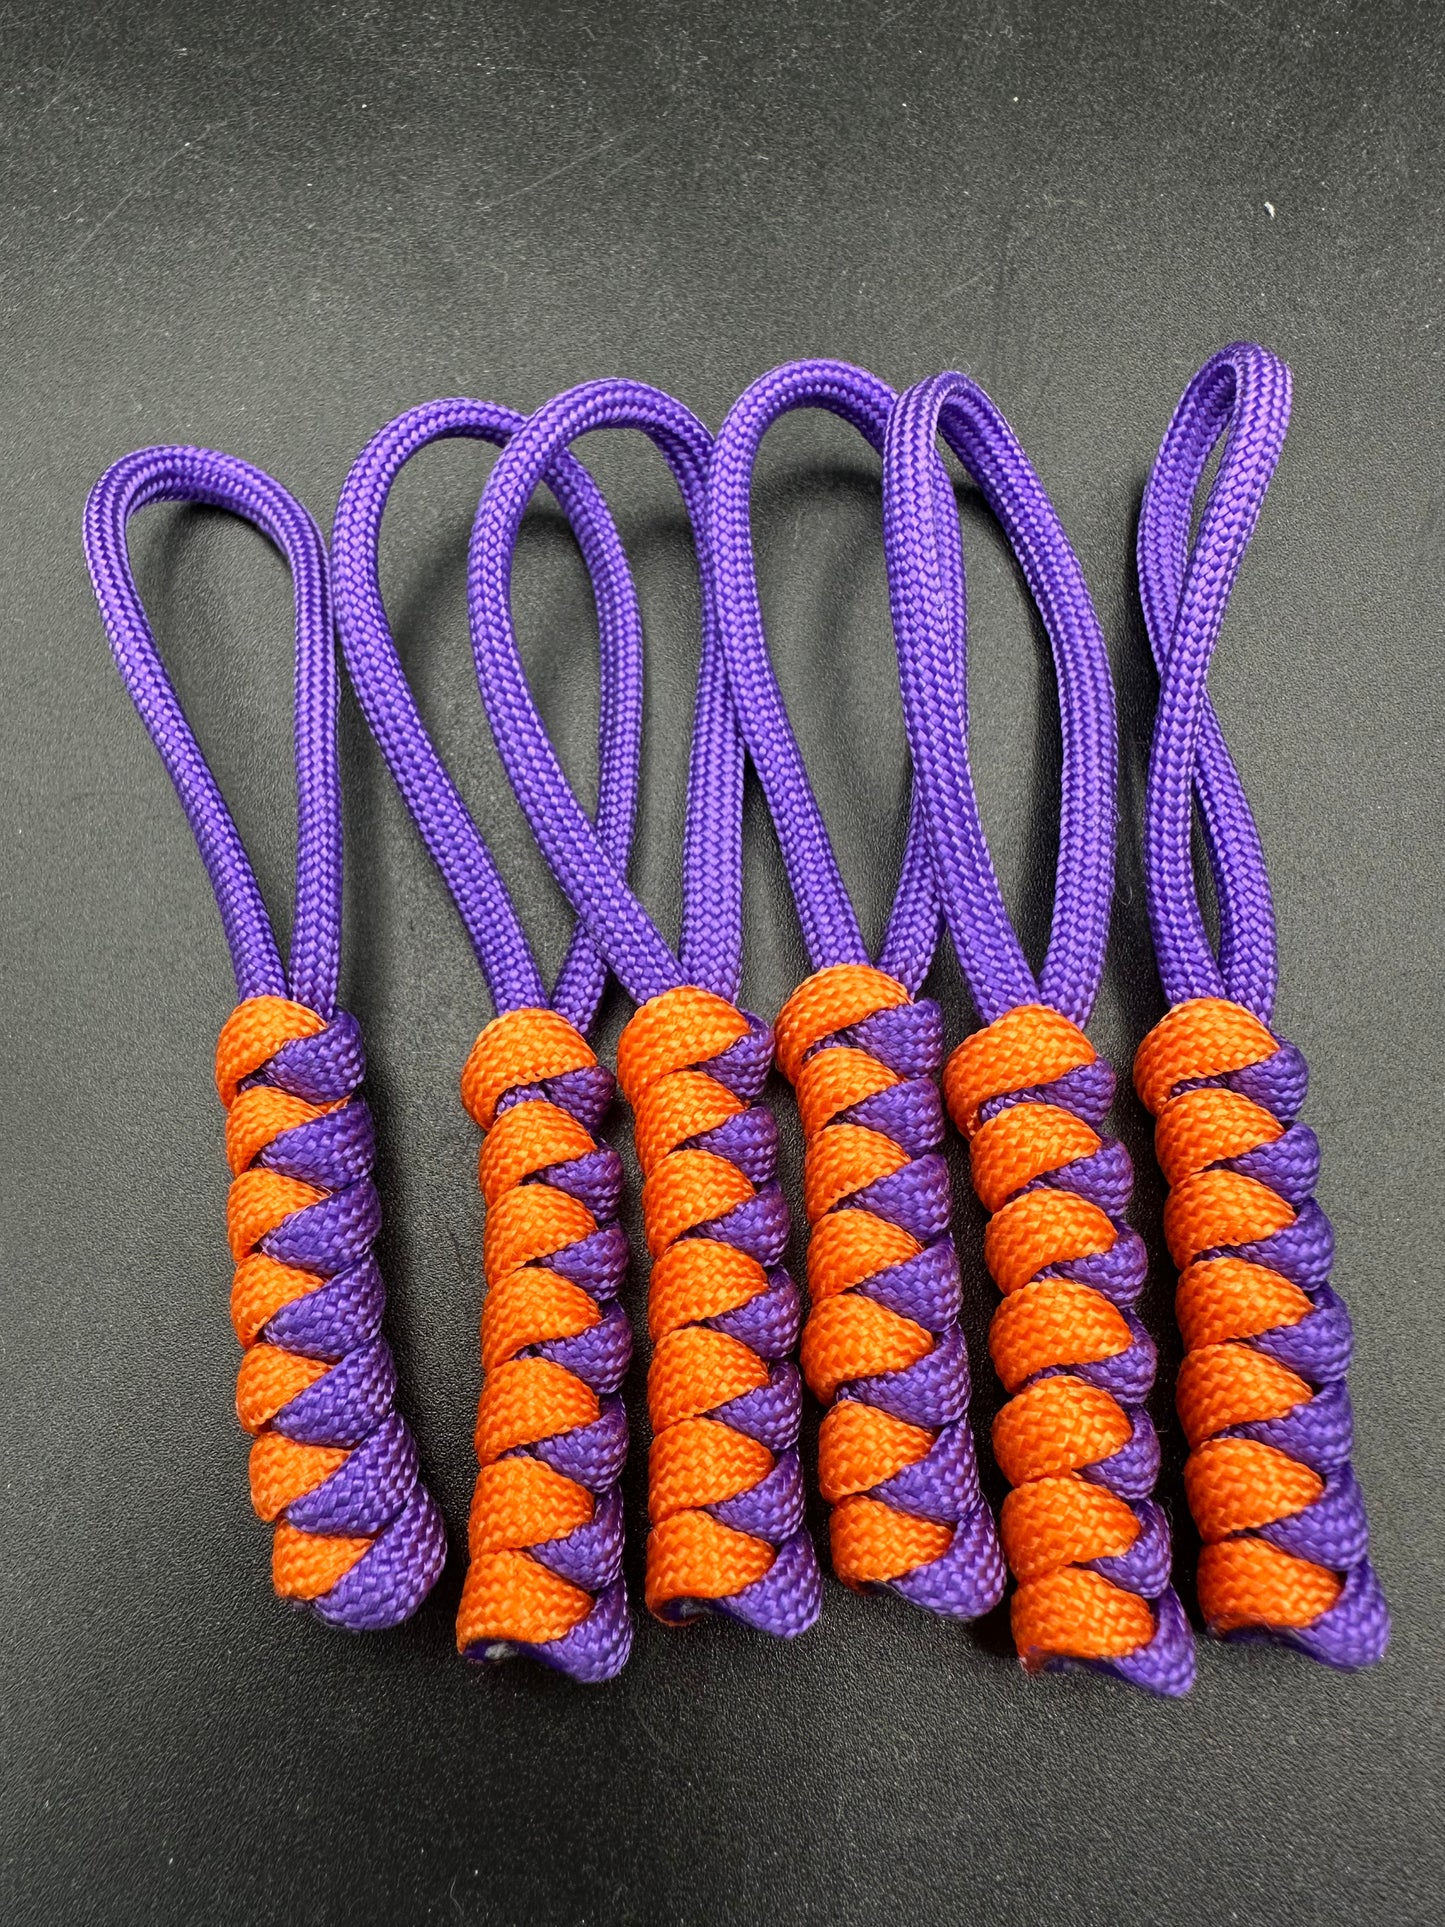 Paracord zip pulls in a Halloween themed purple and bright orange 
Sold as a 6 pack theses are light weight, strong and all handmade in our U.K. store